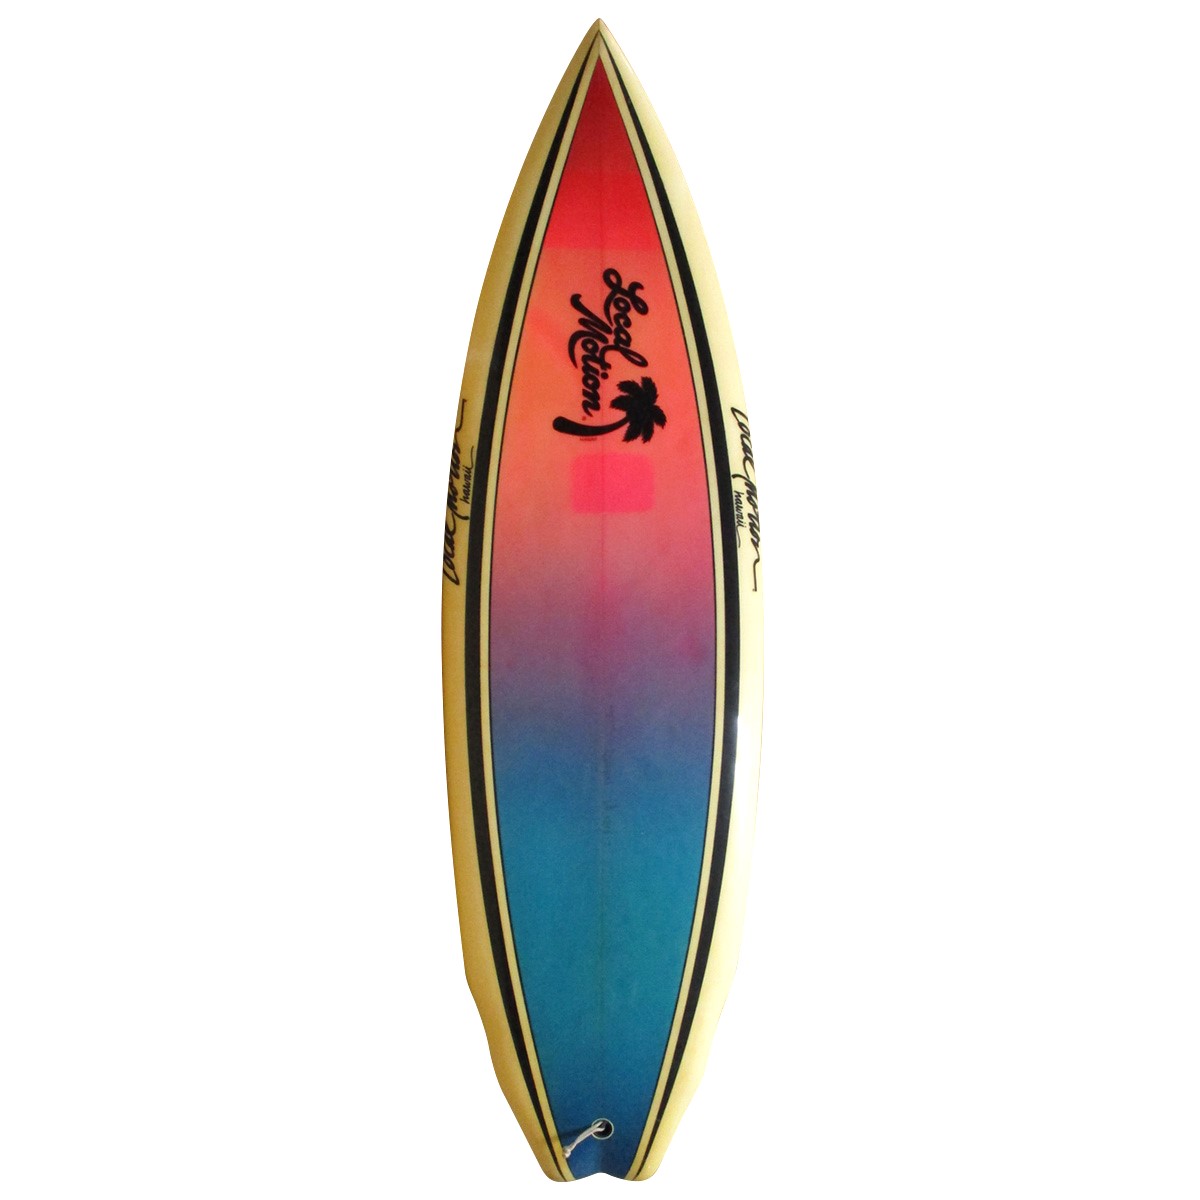 LOCAL MOTION / VINTAGE Shaped by PAT RAWSON | USED SURF×SURF MARKET